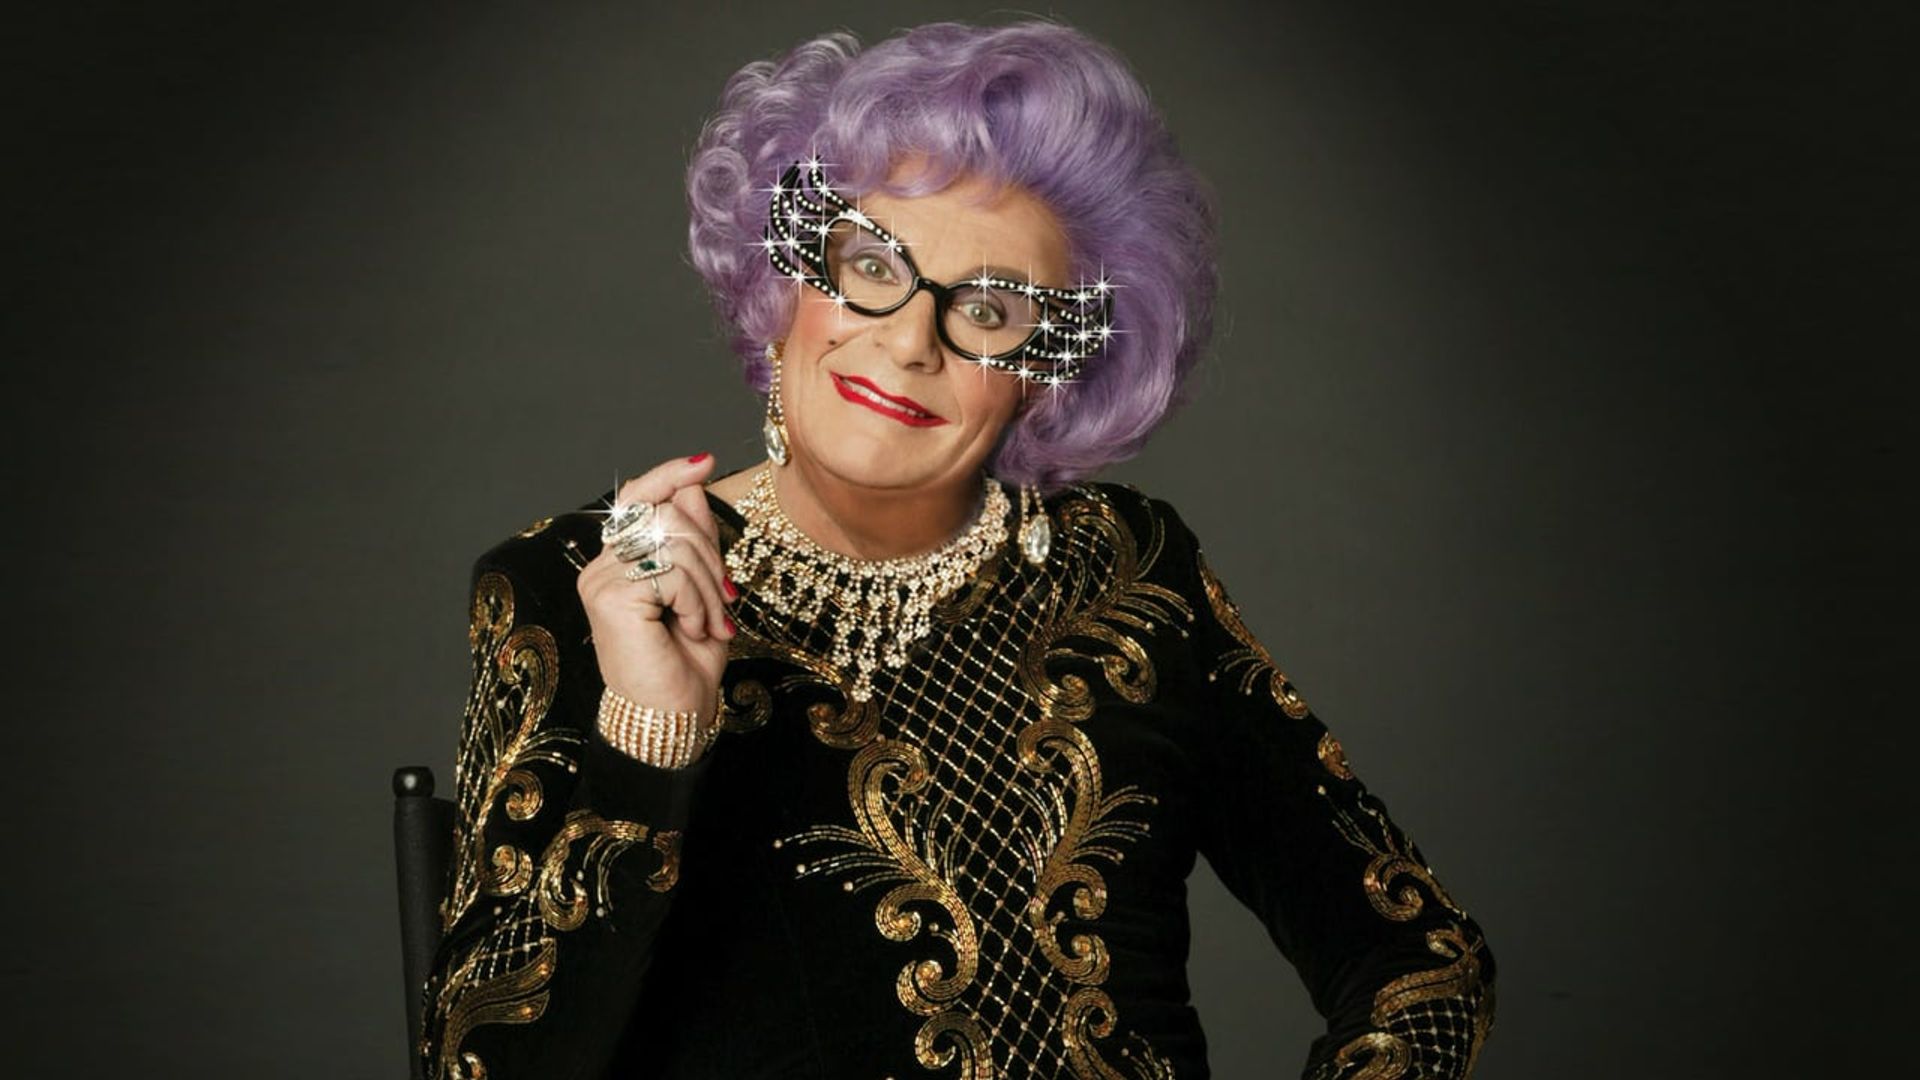 The Dame Edna Treatment background